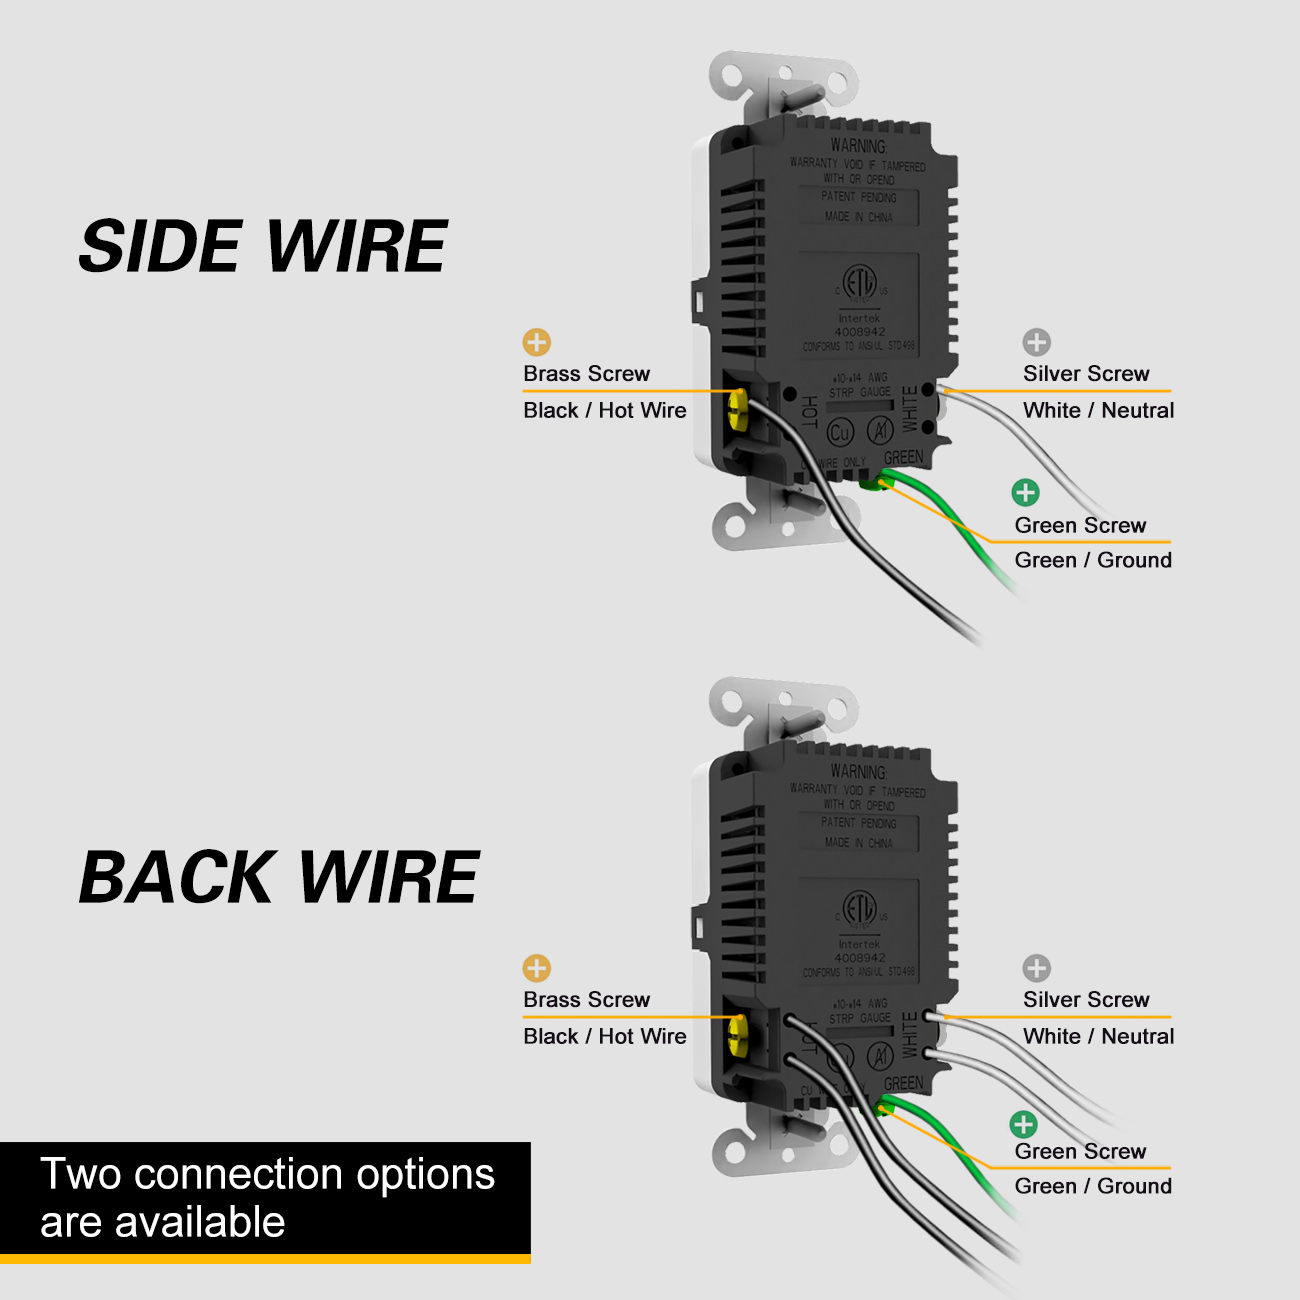 News - Back Wiring vs. Side Wiring Demystified with Faith Electric